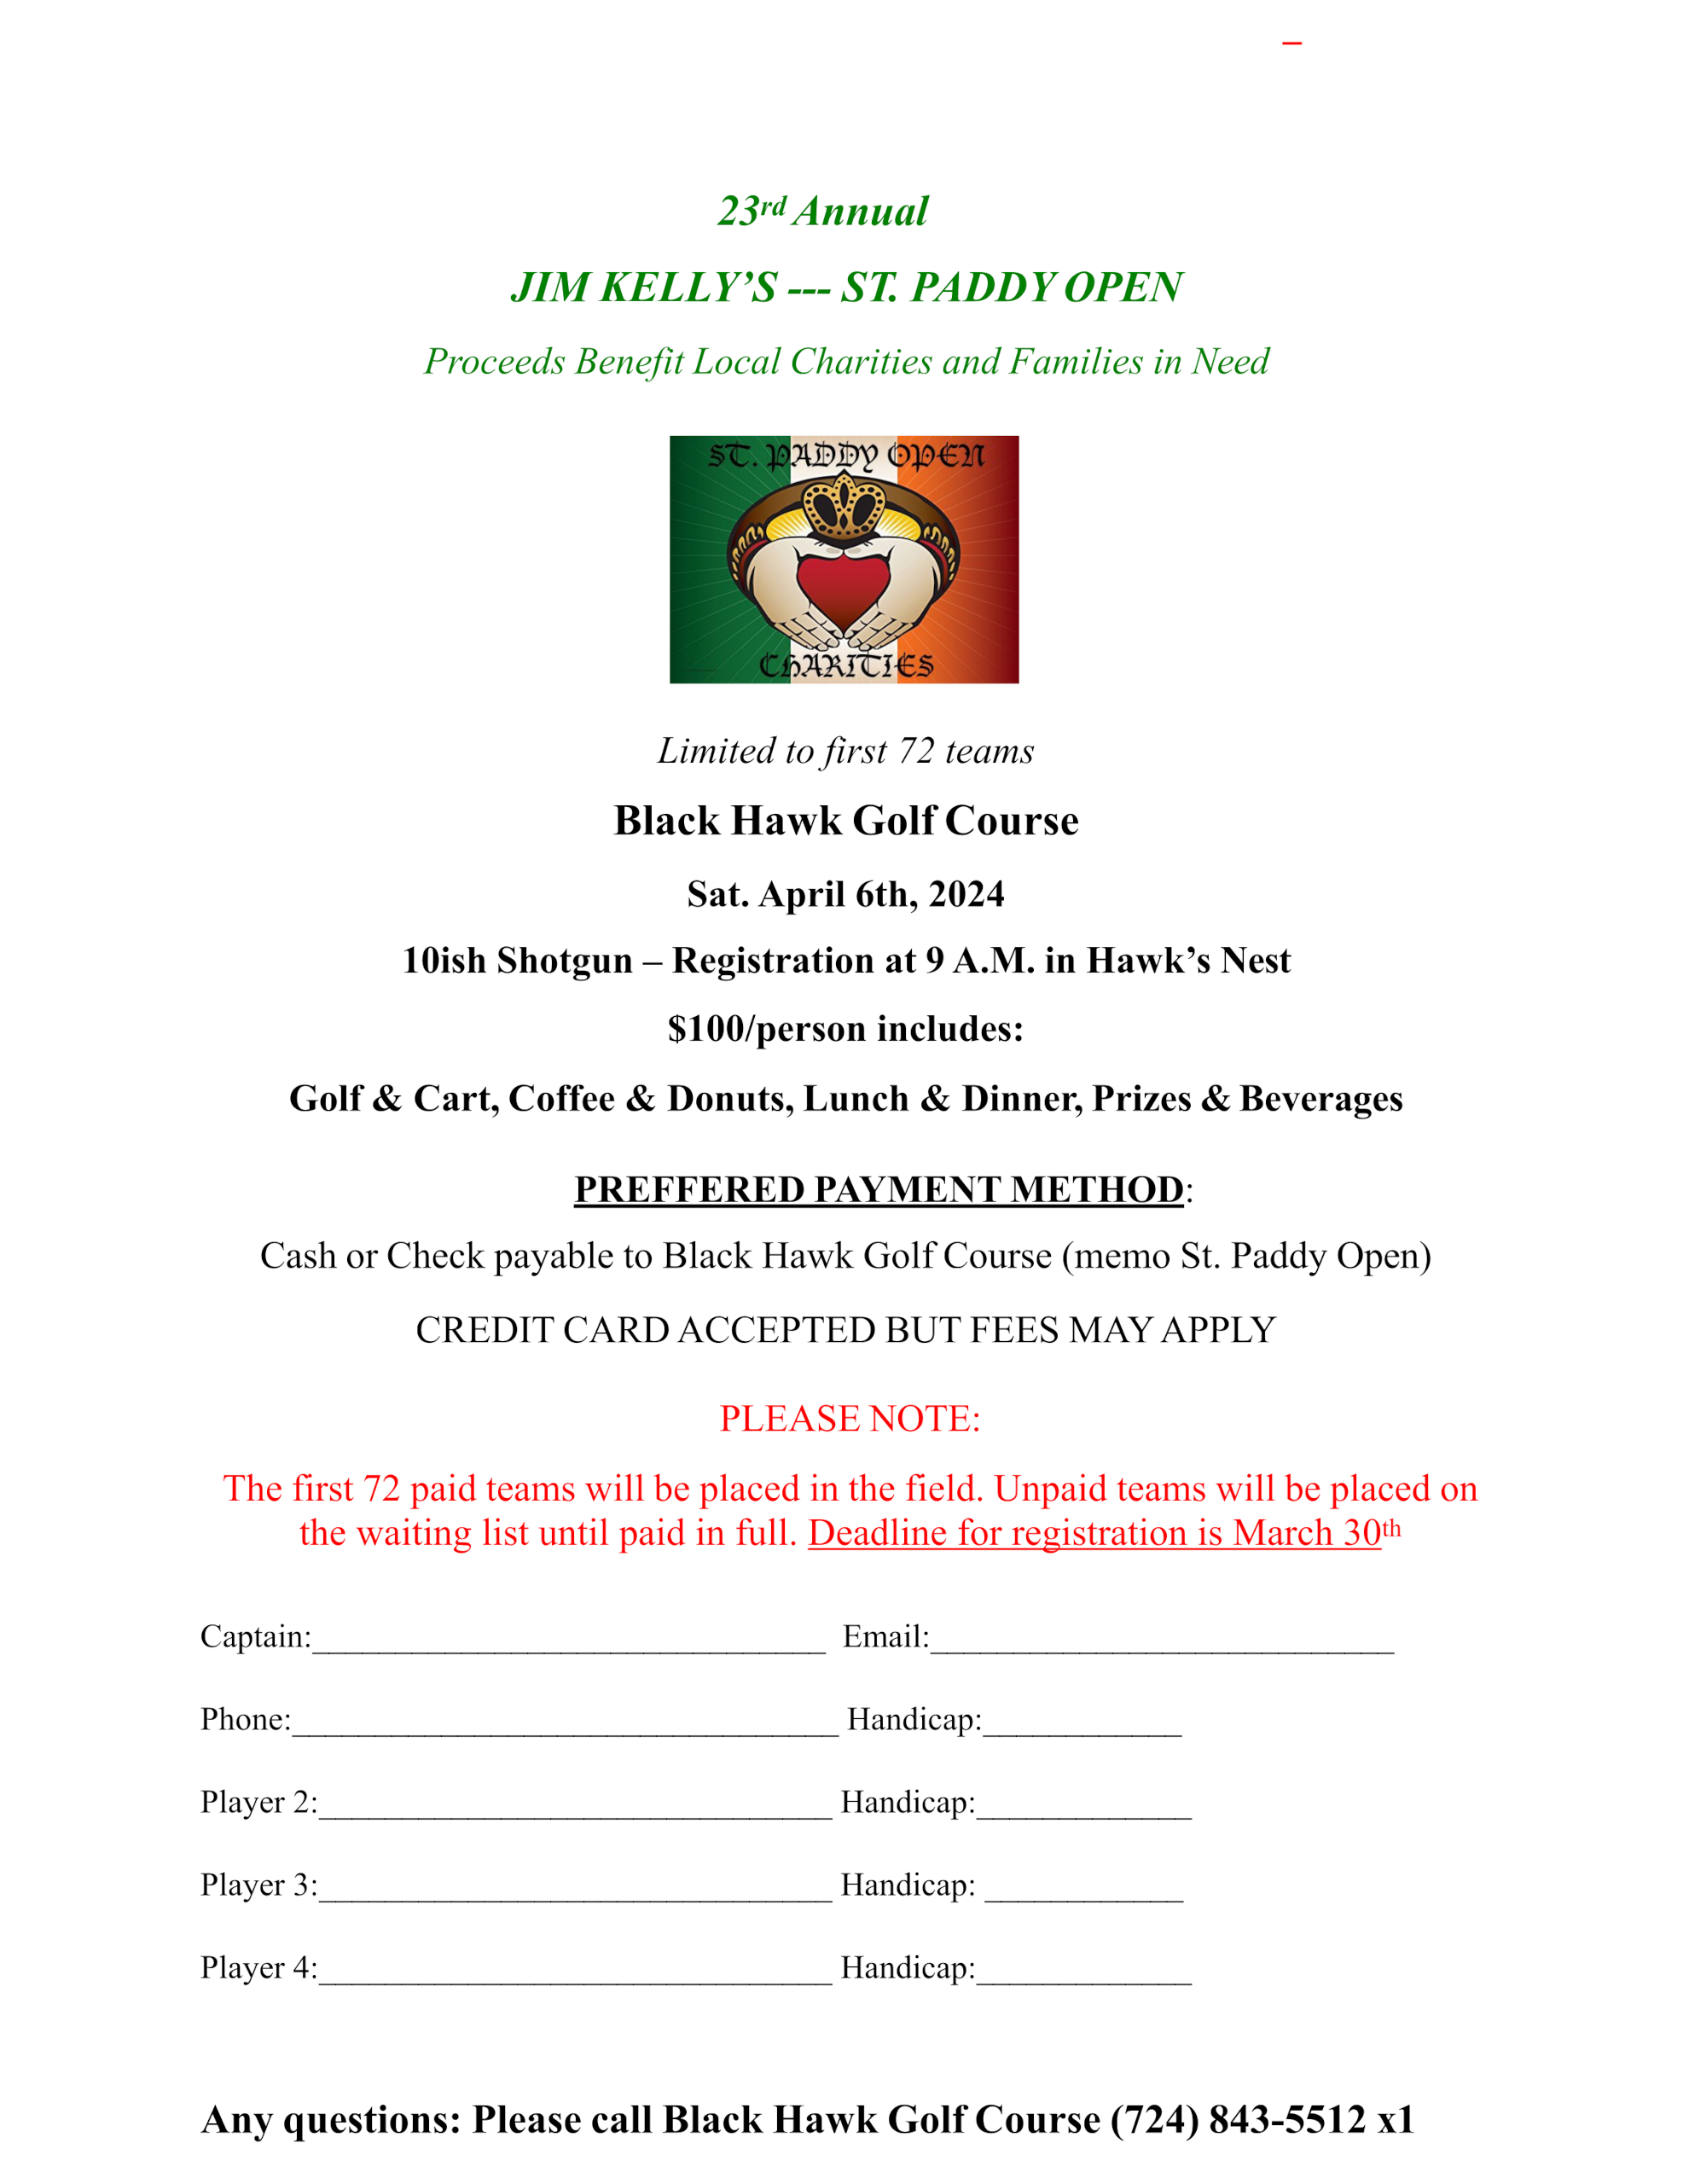 Black Hawk Golf Course | Home / Events Calendar - (February 2024) Black Hawk Golf Course Home / Events Calendar – (February 2024) BHGC (April 2024) St. Paddy's Day Open (Event / Flyer)